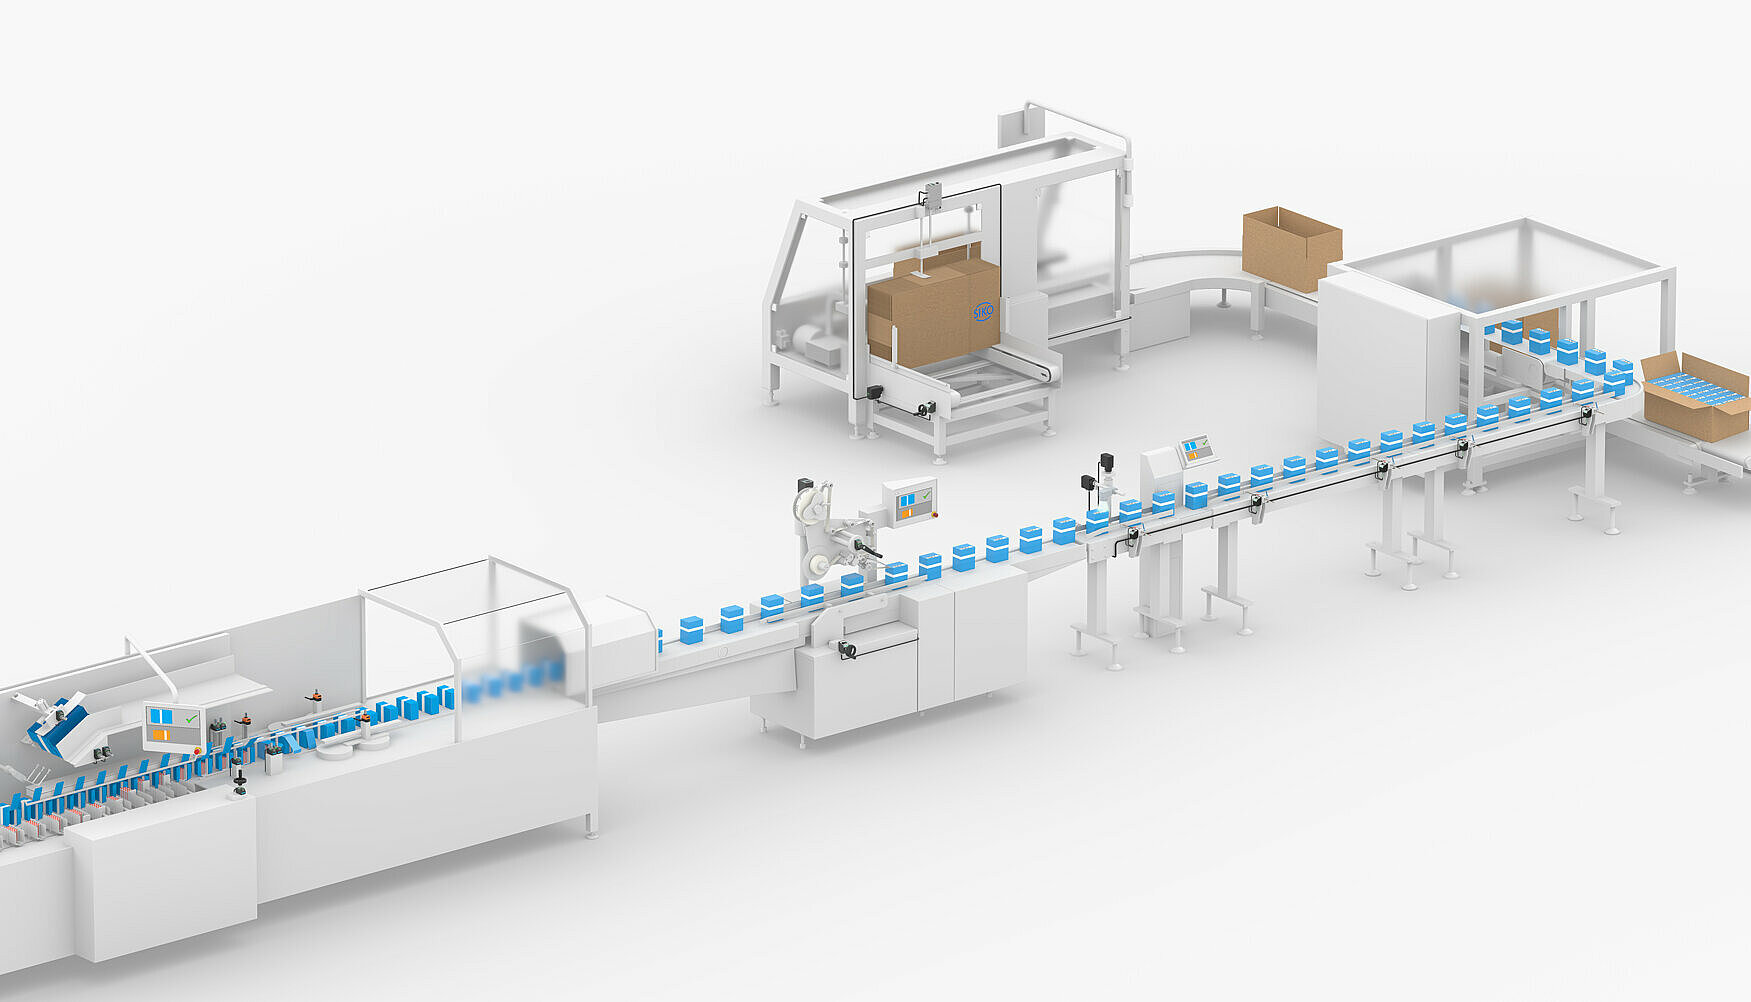 Packaging system with position indicators and positioning drives